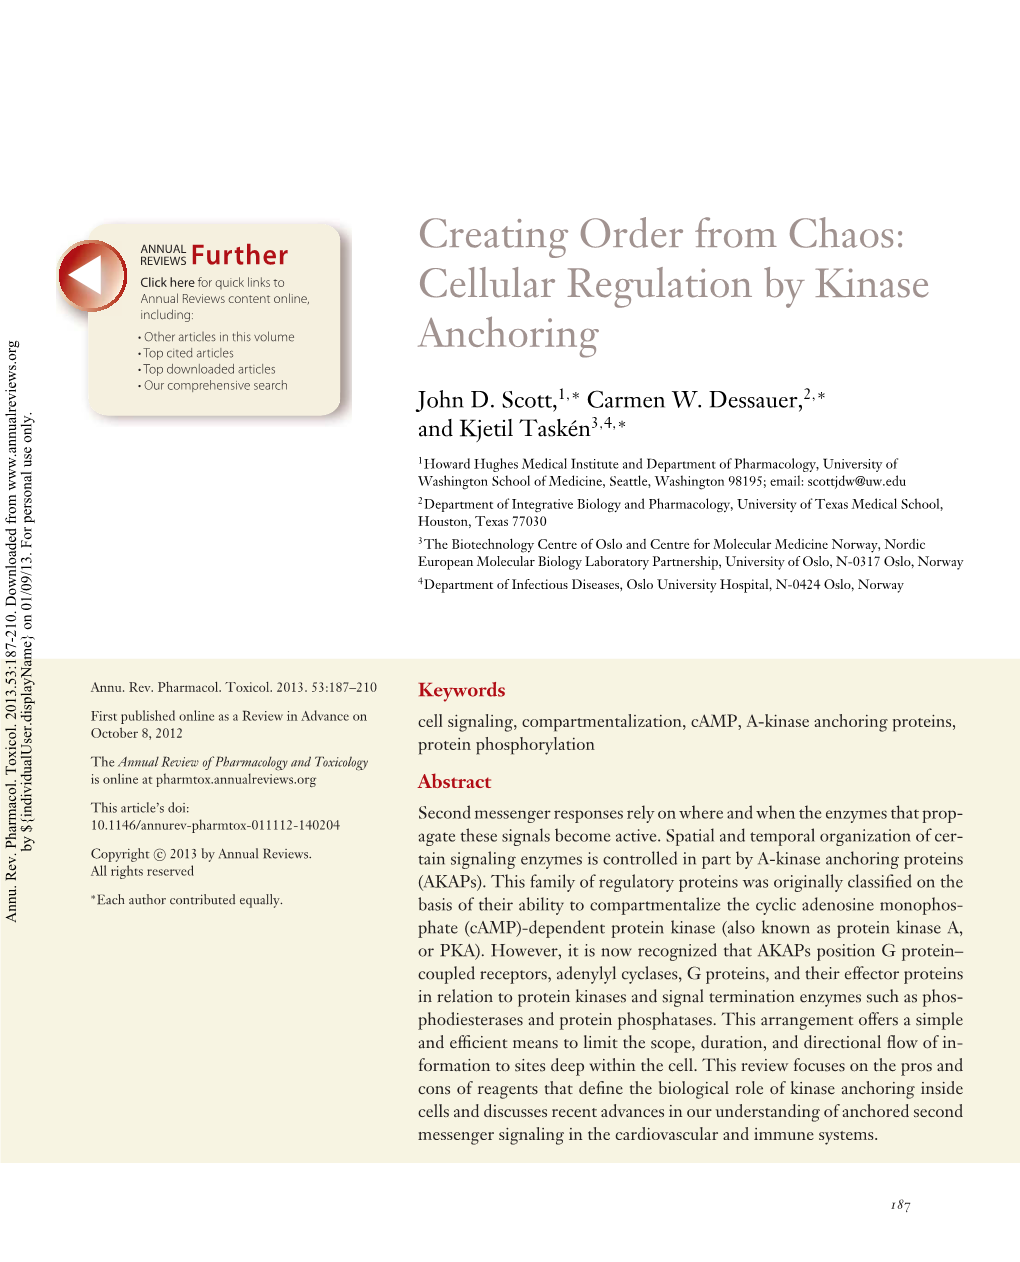 Creating Order from Chaos: Cellular Regulation by Kinase Anchoring